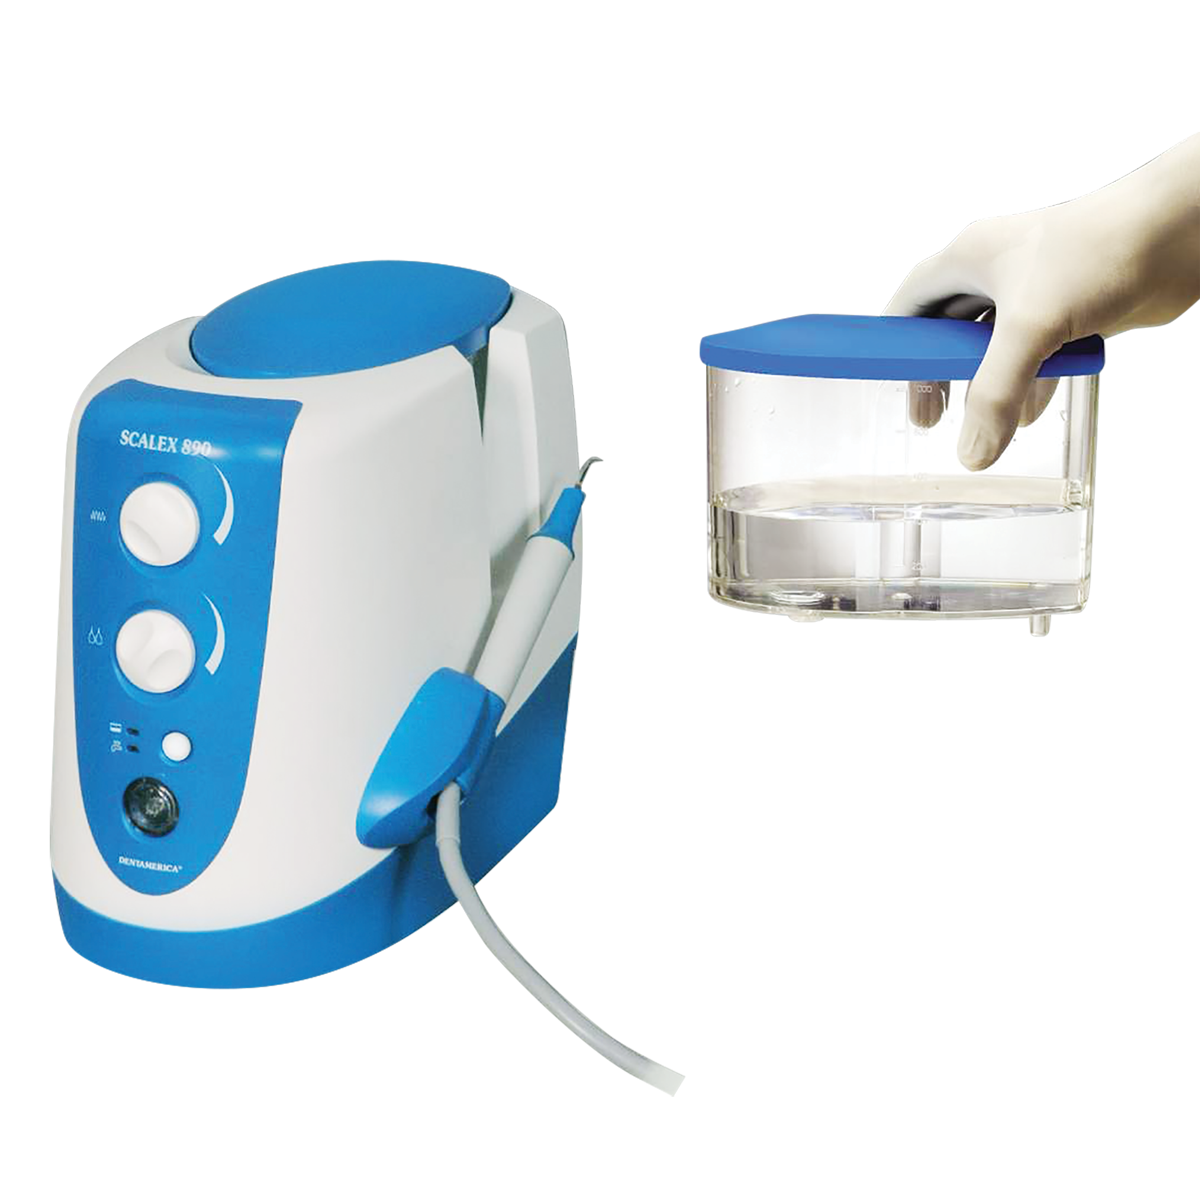 Scalex 890 Self-Contained Ultrasonic Scaler